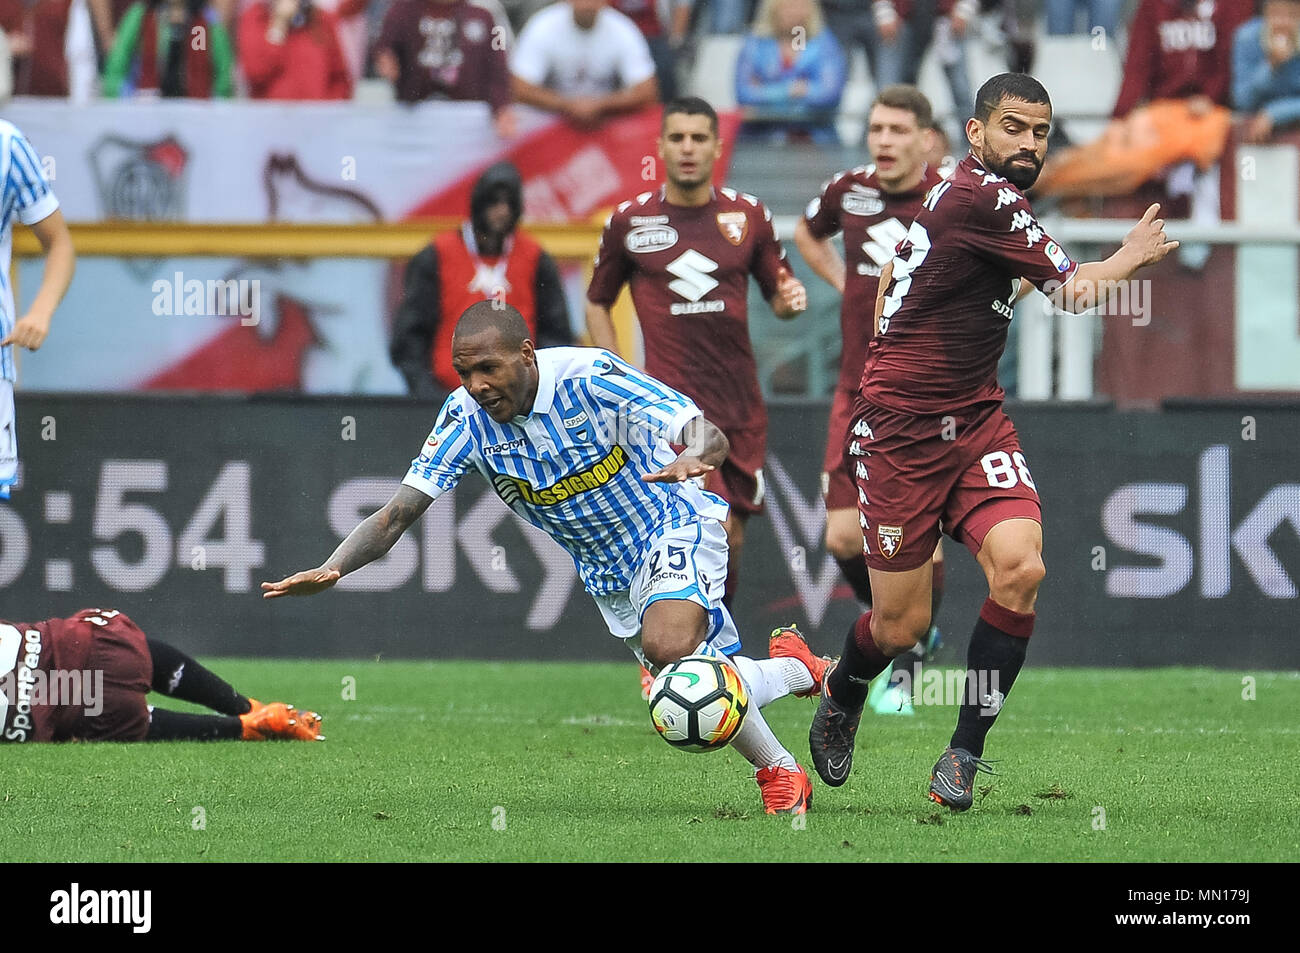 Torino, Italy. 13th May, 2018. Luiz Everton (SPAL) during the Serie A football match between Torino FC and SPAL at Stadio Grande Torino on 13th May, 2018 in Turin, Italy. Credit: FABIO PETROSINO/Alamy Live News Stock Photo